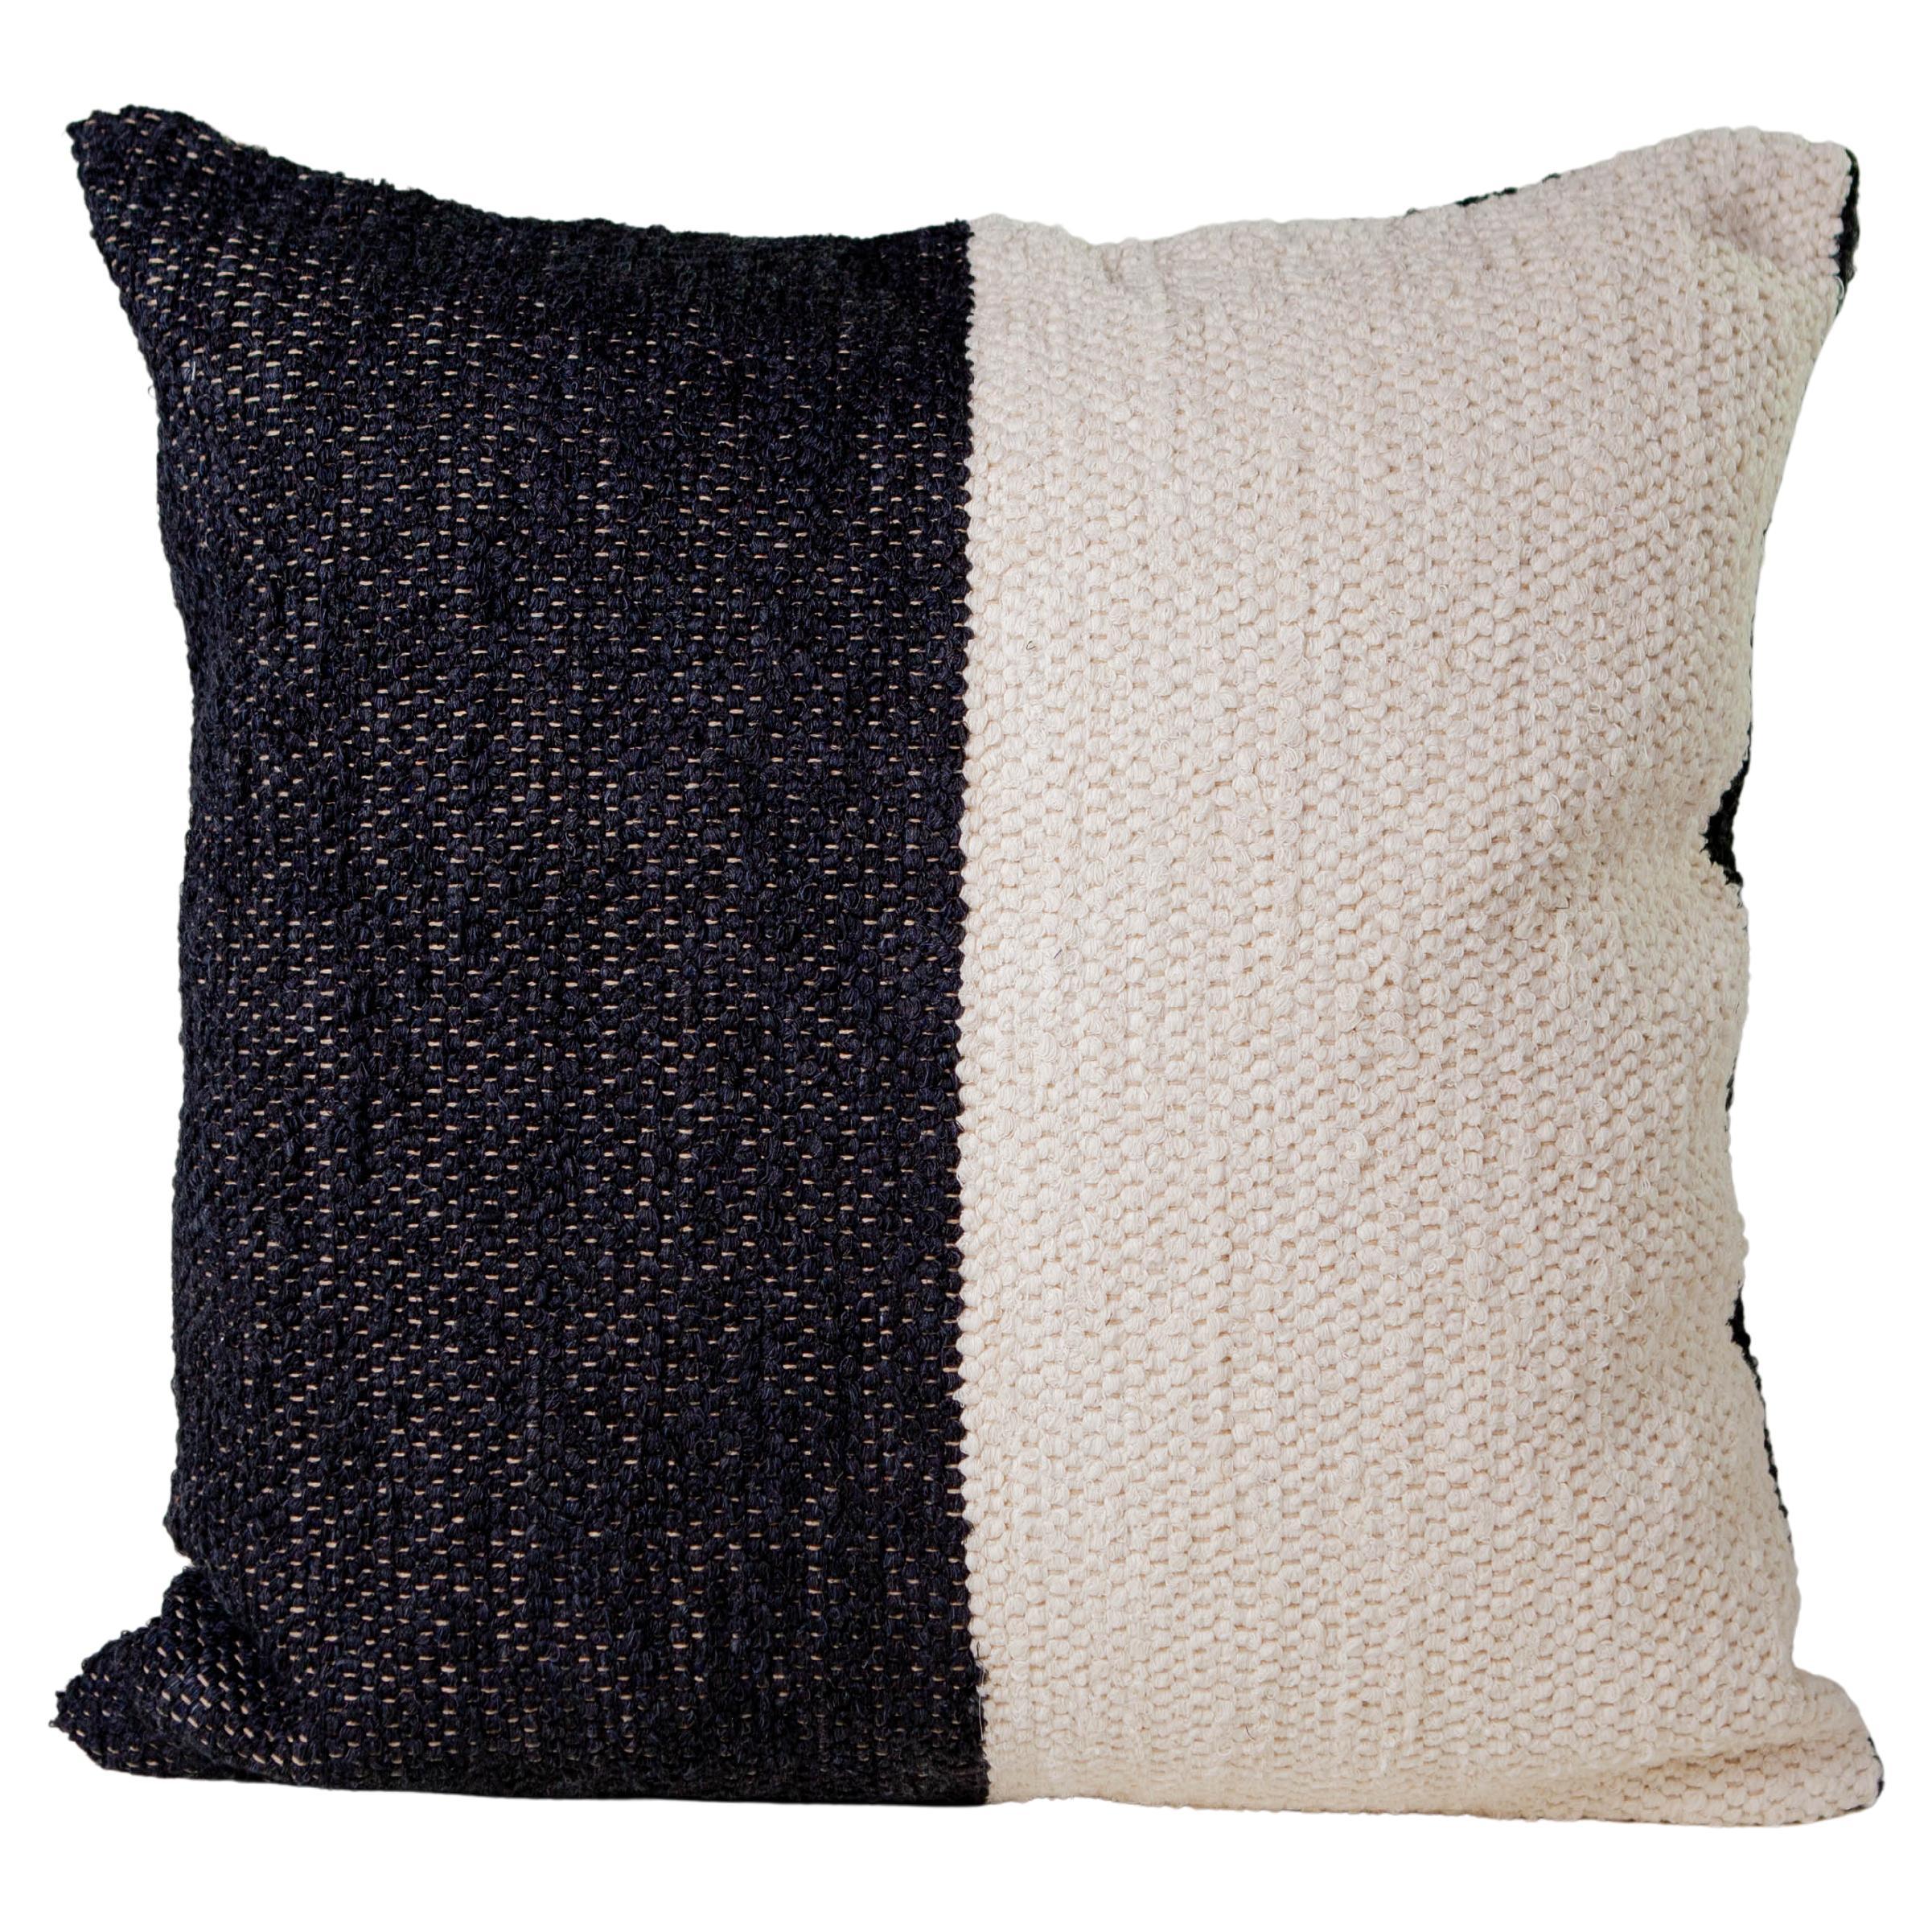 Handwoven Cotton Black and White Color Block Throw Pillow, in Stock